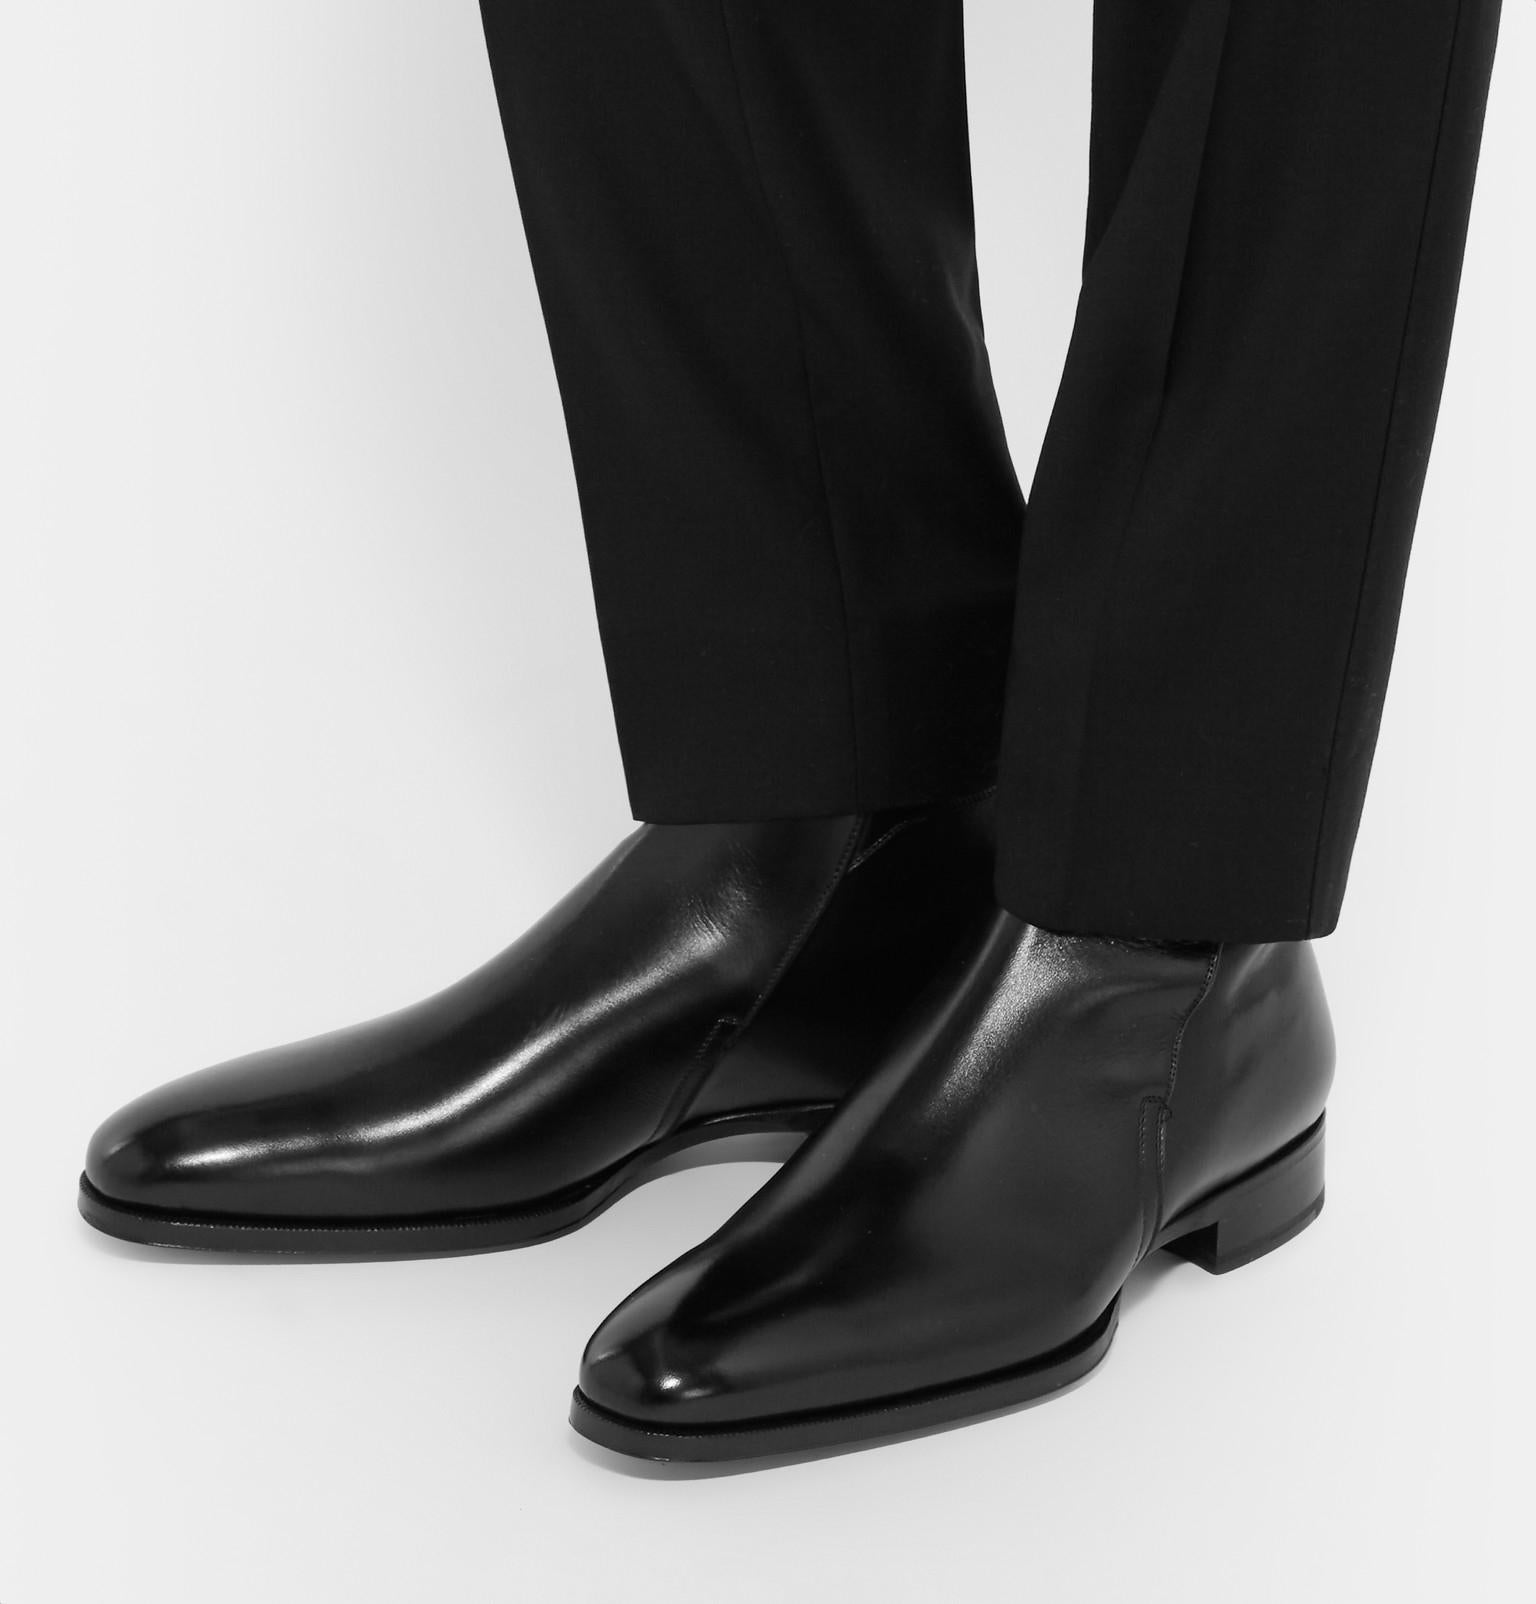 New Tom Ford Austin Polished-Leather Black Boots
Designer size 12.5 - It / Fr 44.5
Designer size 10 - It / Fr. 42
Stylish, suave and impeccably made are a few words to describe TOM FORD's designs.
These 'Austin' boots are rendered from polished